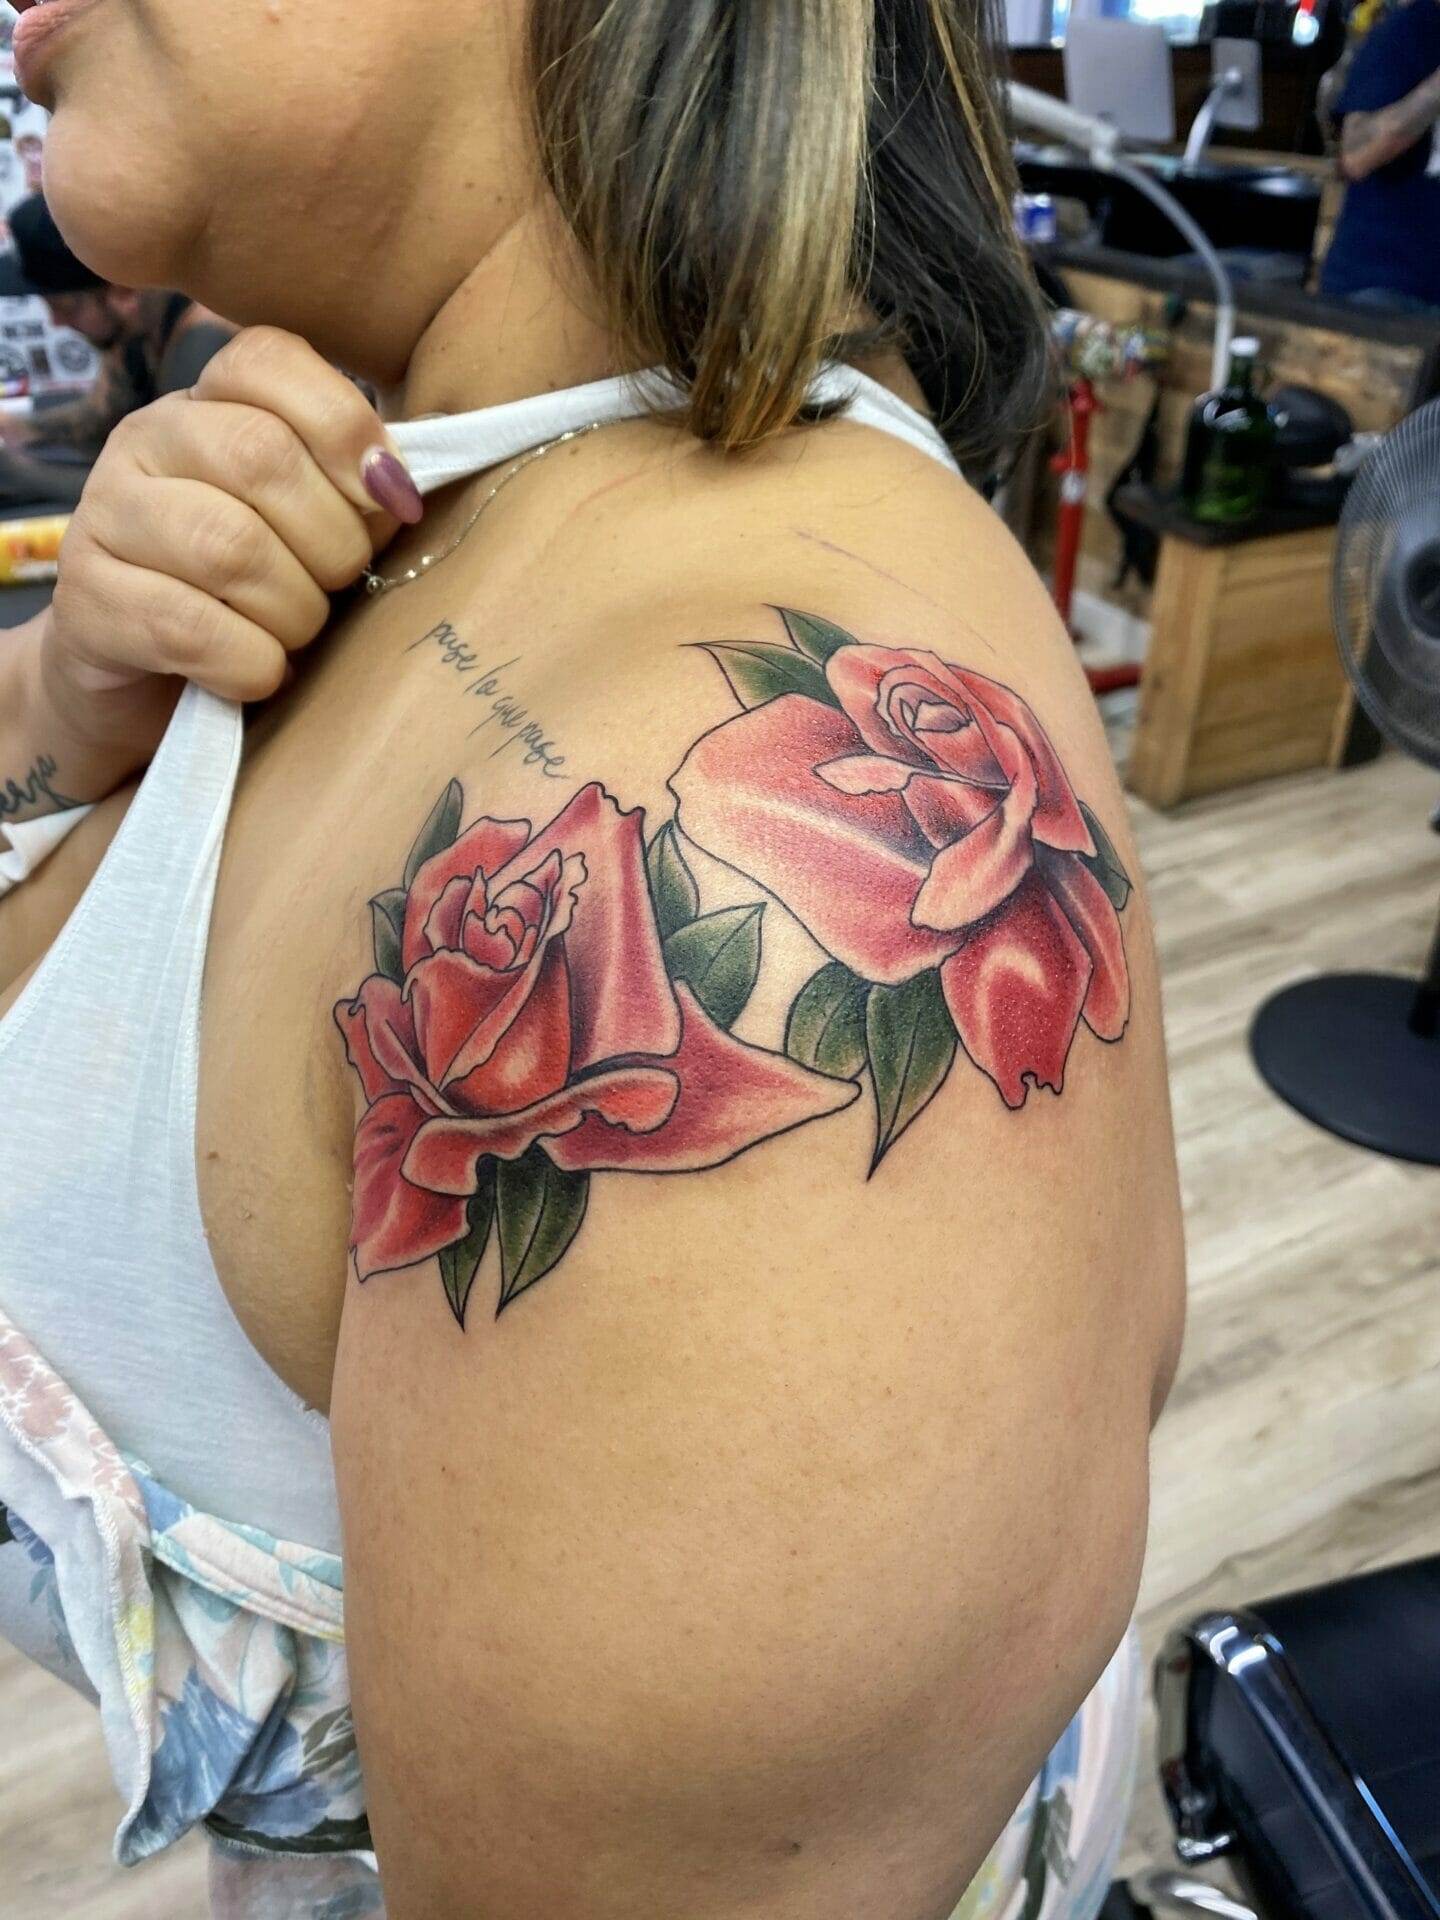 Diversity Tattoo - Nothing says I Love You ❤️ like a Tattoo Book your  appointments ! 🔥Diversity🔥 Tattoo-Body Piercing-Smoke Shop #valentines .  . #tattooideas #inkdrawing #inkmaster #inkyourself #inkedgirls #inkme  #inkofinstagram #inkoftheyday #ink702 #